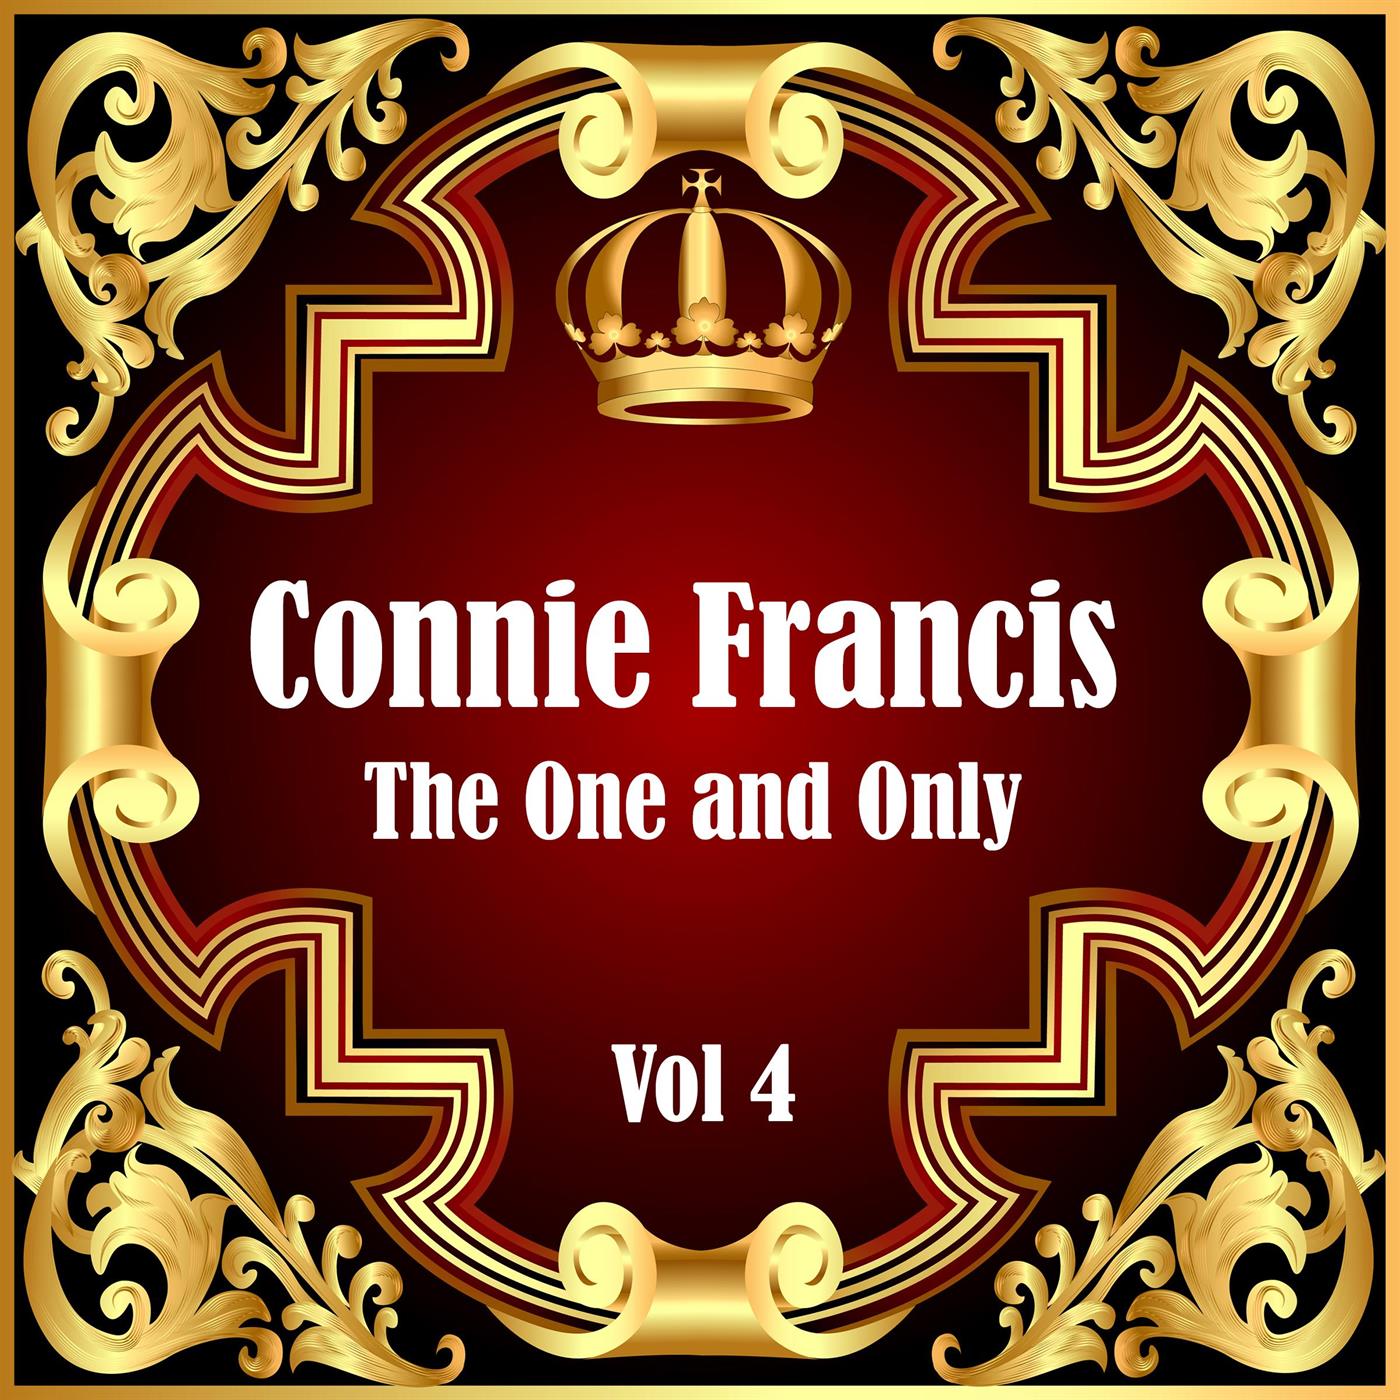 Connie Francis: The One and Only Vol 4